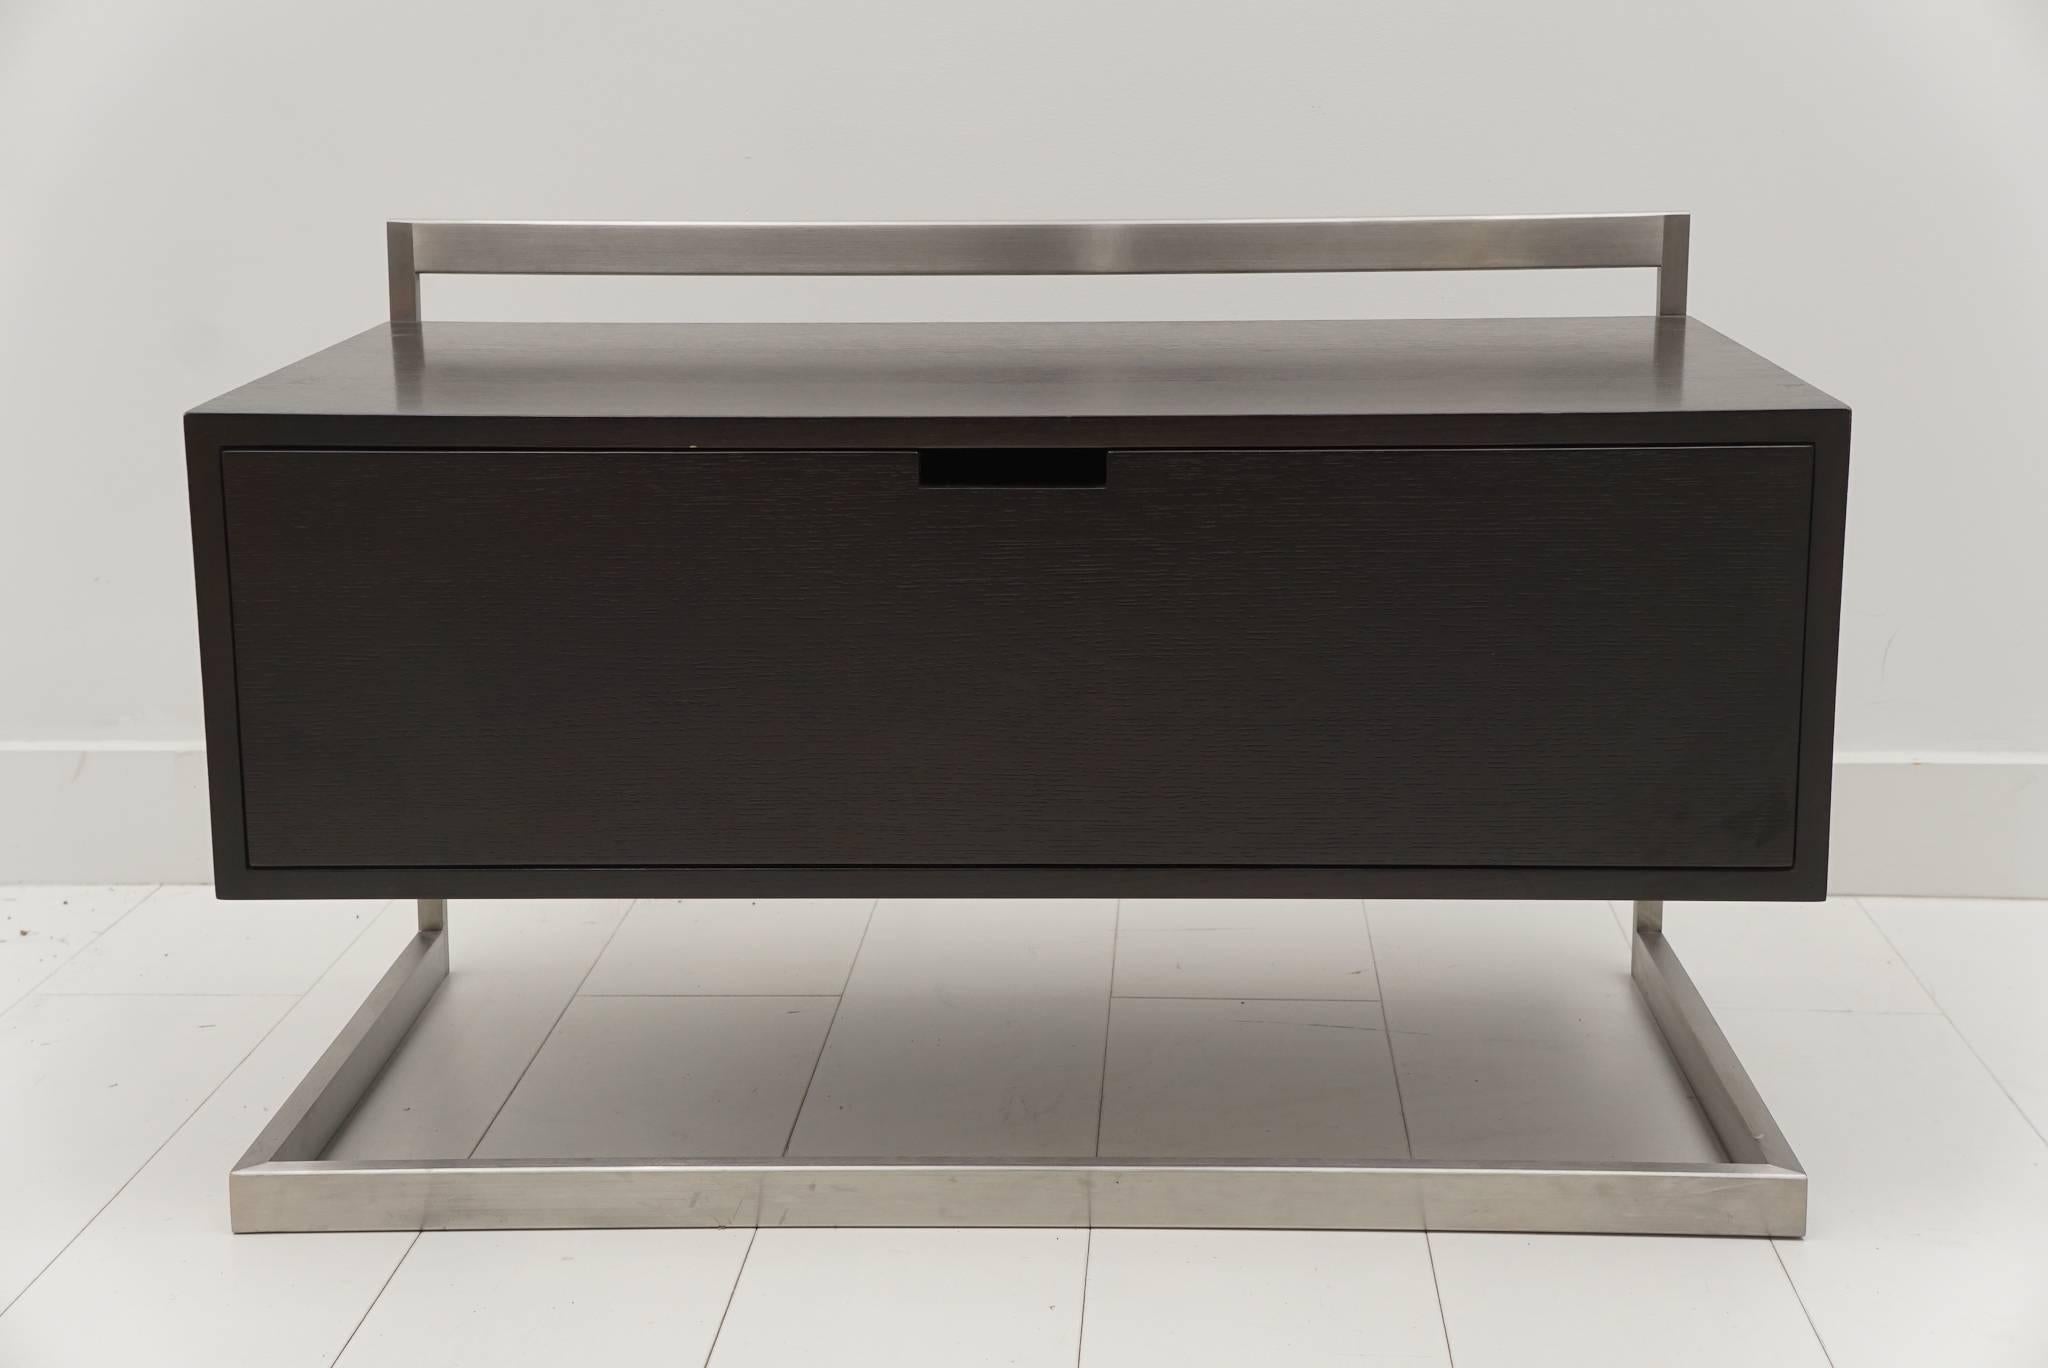 Custom Niedermaier wenge end table with one drawer and satin stainless steel frame.